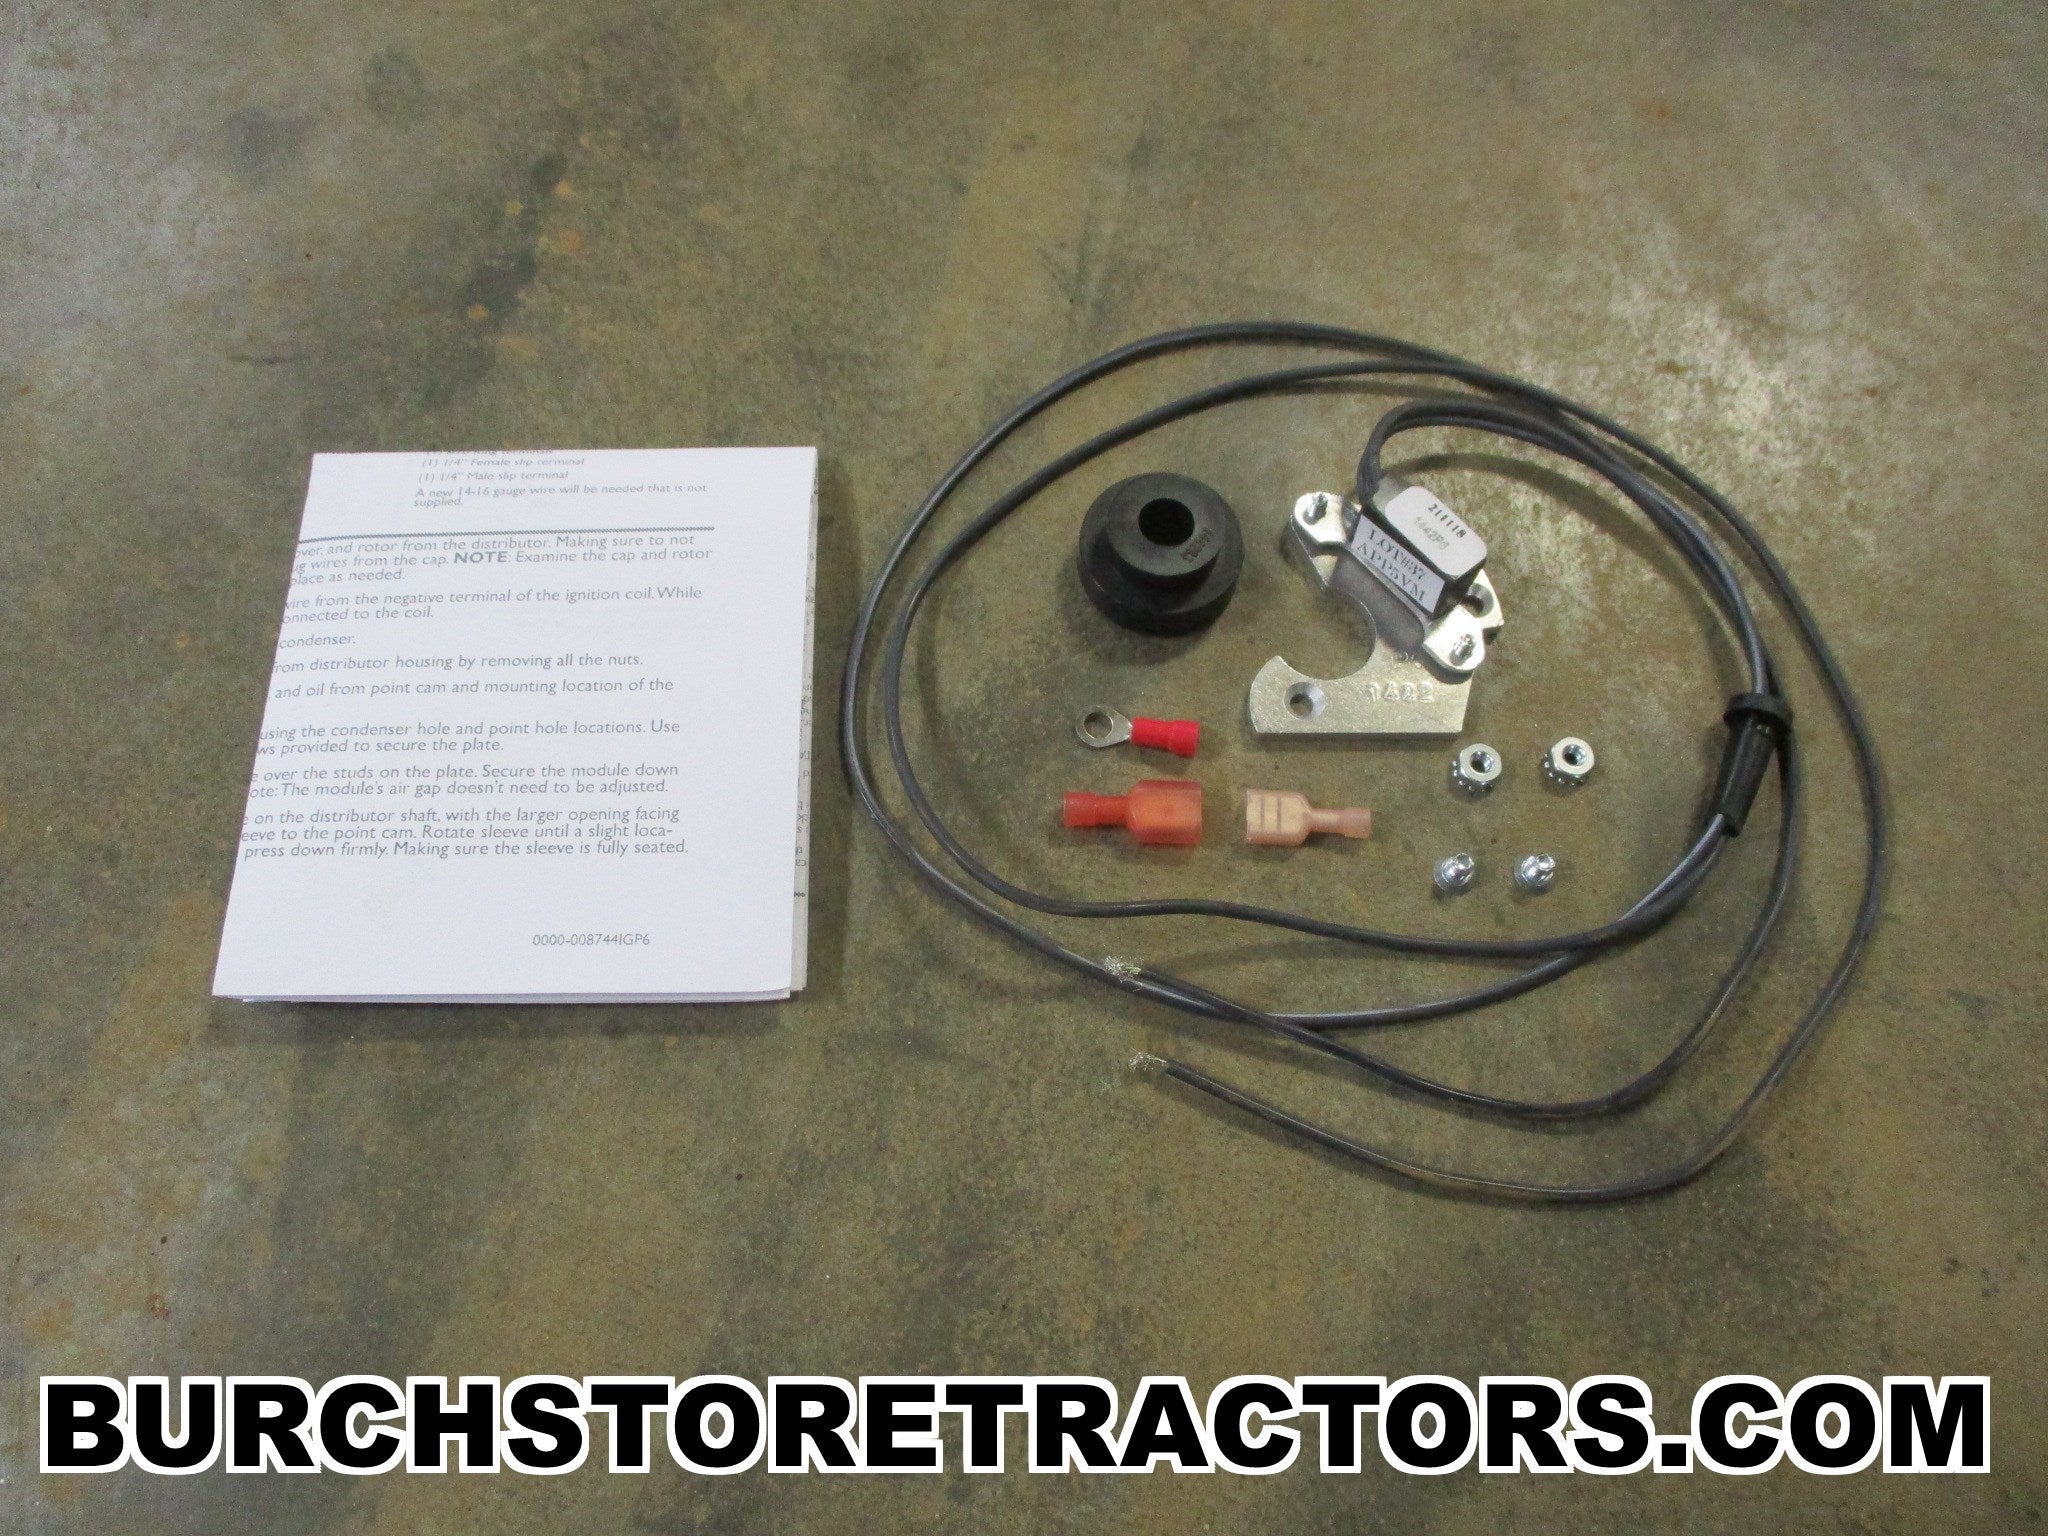 New Volt Electronic Ignition for Farmall 100, 130, 140, 200, 230, 24 –  Burch Store Tractors